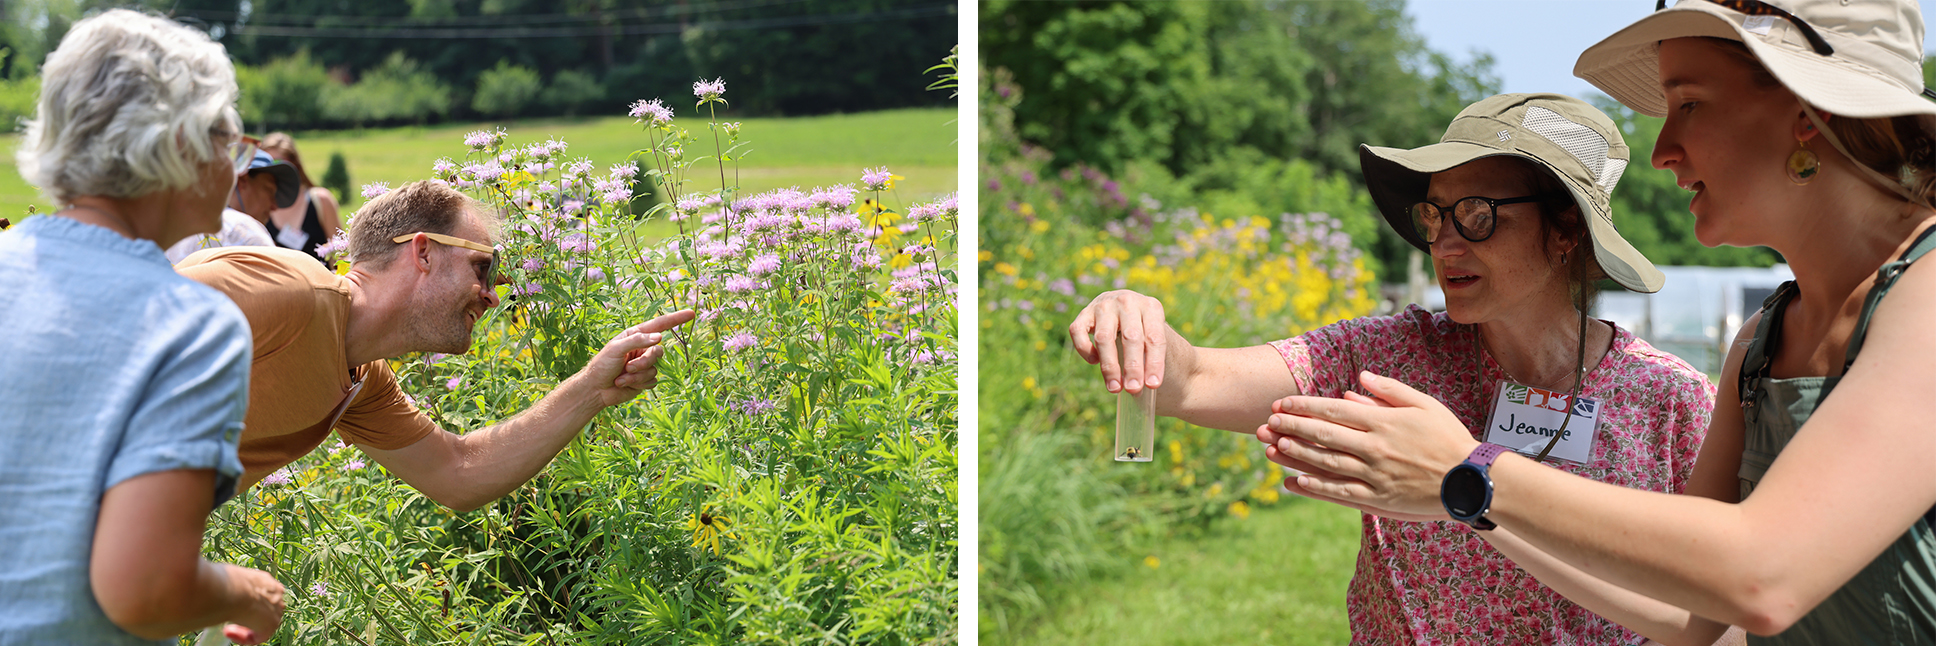 A collage of two images: Two adults smile while looking at a pollinator garden in summertime, and two adults inspect a bee in a vial